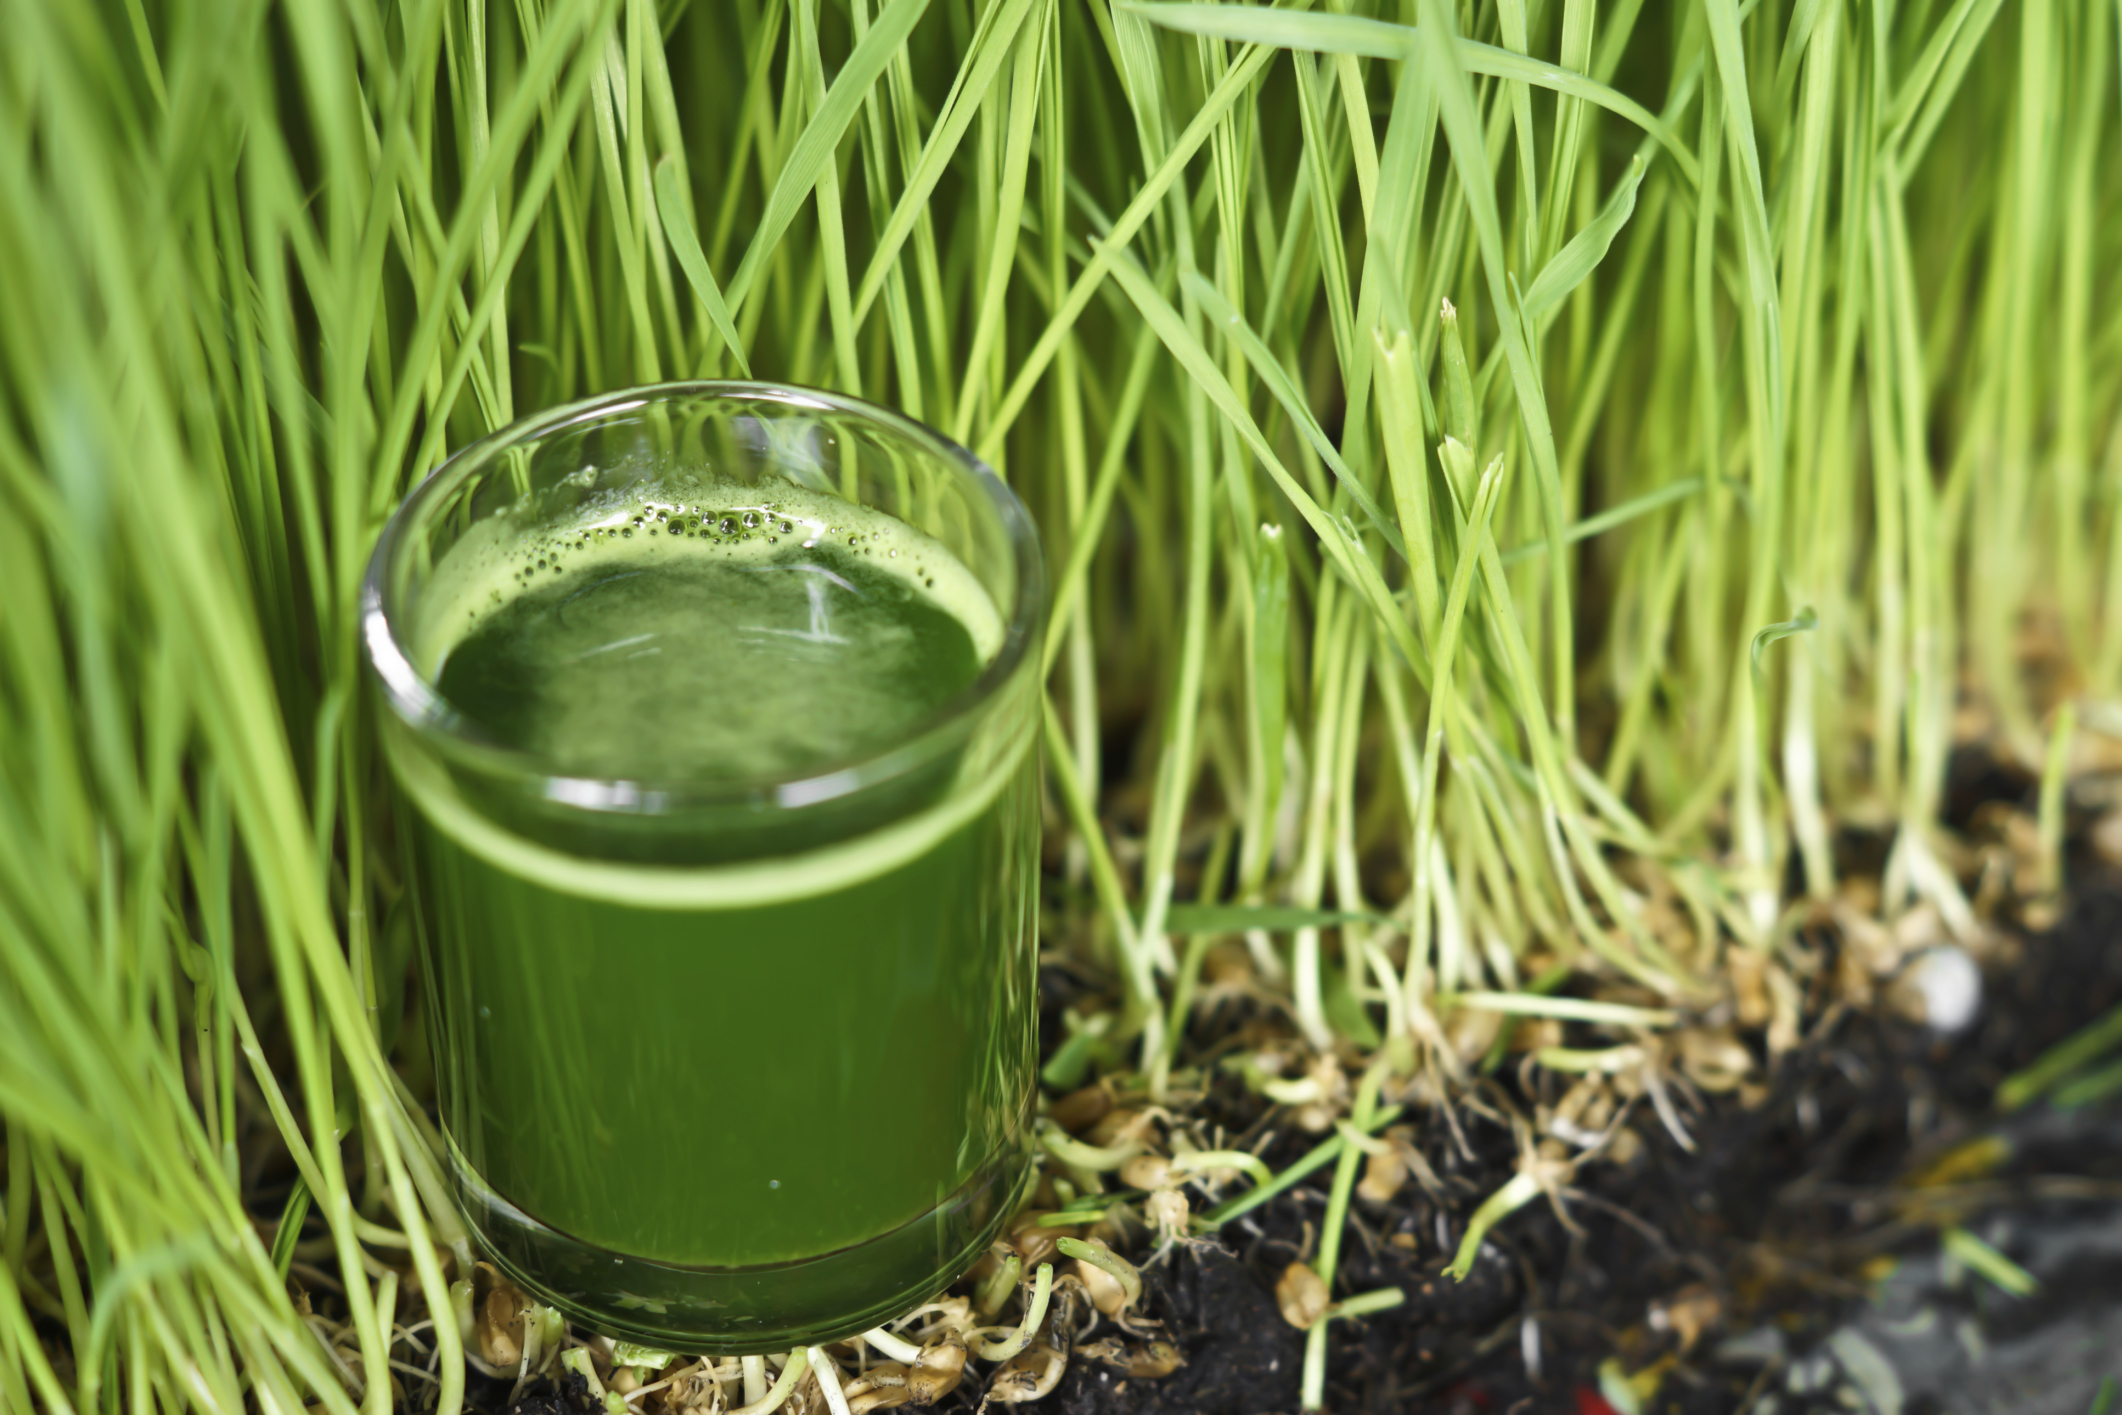 Wheatgrass health benefits and facts